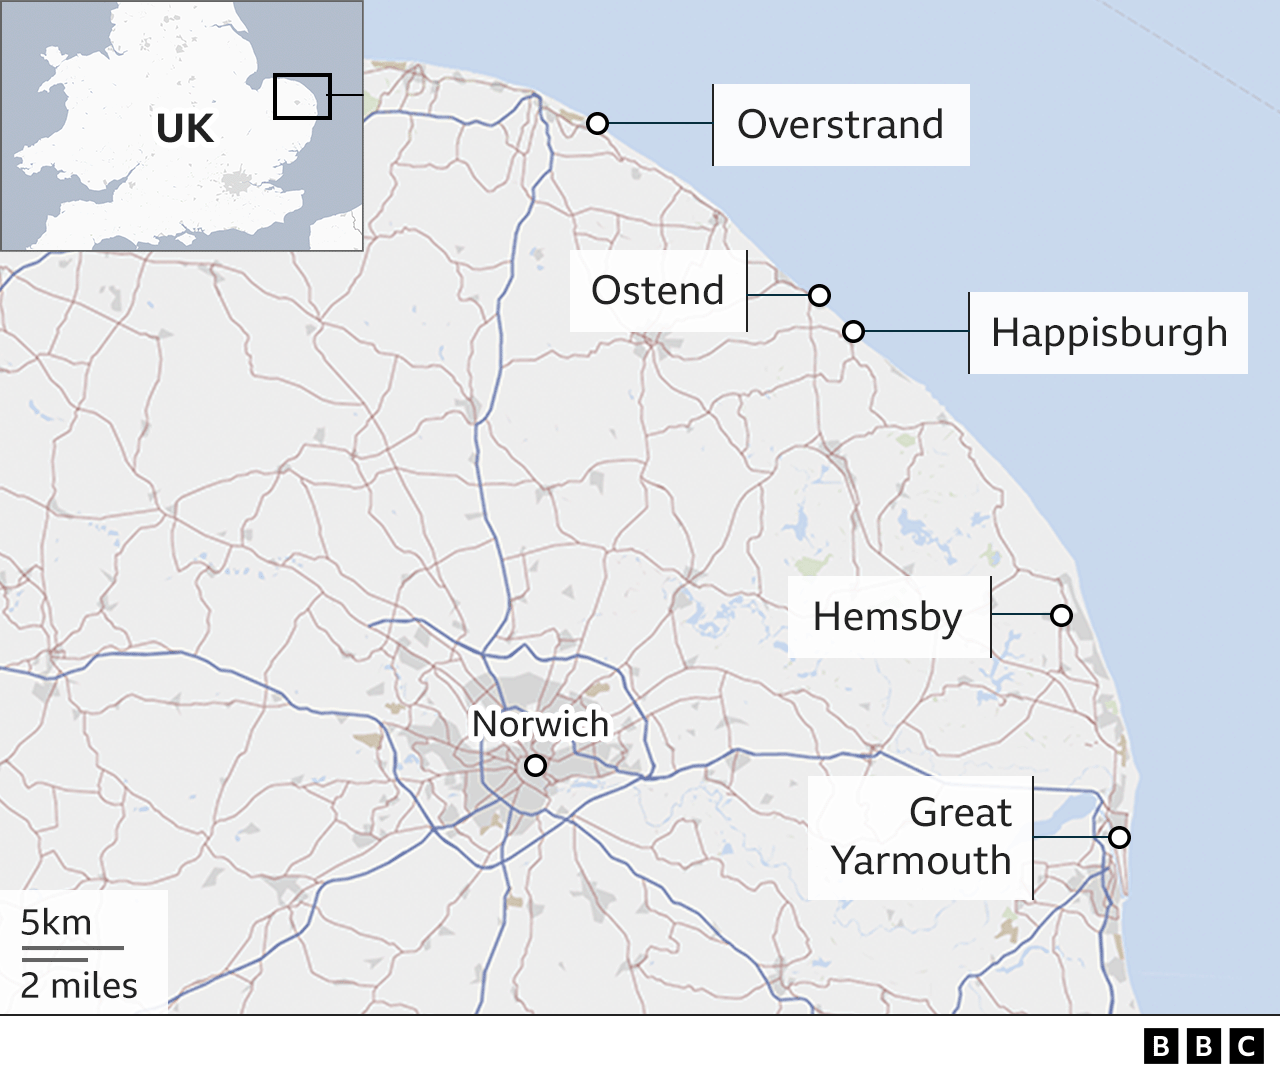 Map showing Happisburgh, Hemsby and Great Yarmouth